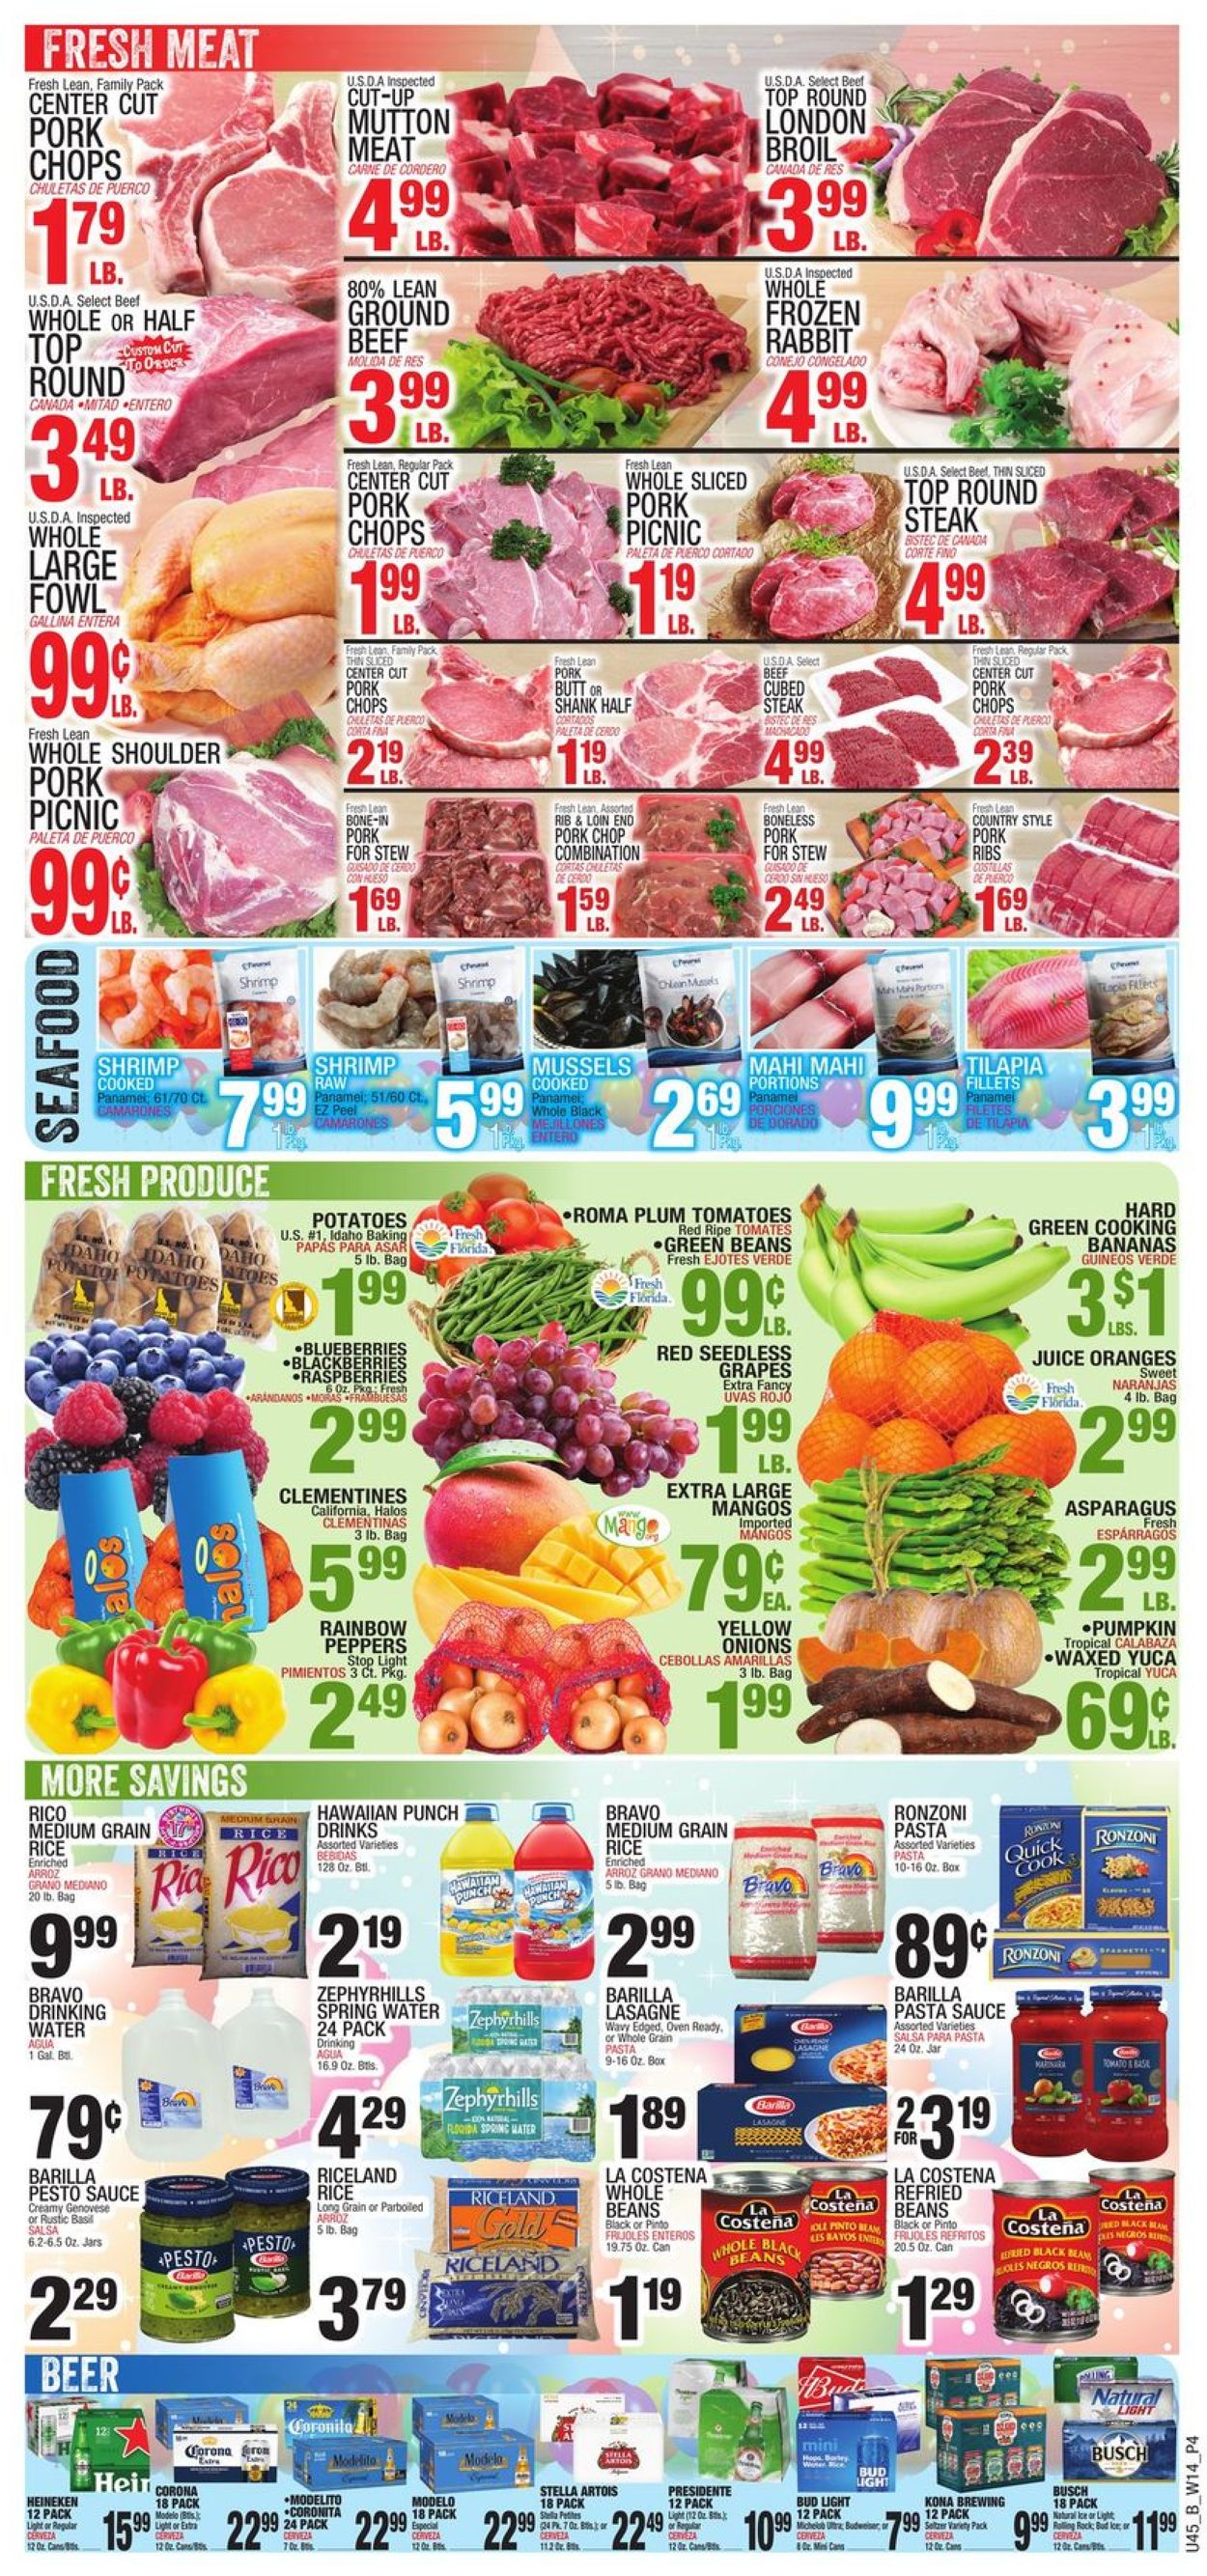 Catalogue Bravo Supermarkets Easter 2021 ad from 04/01/2021